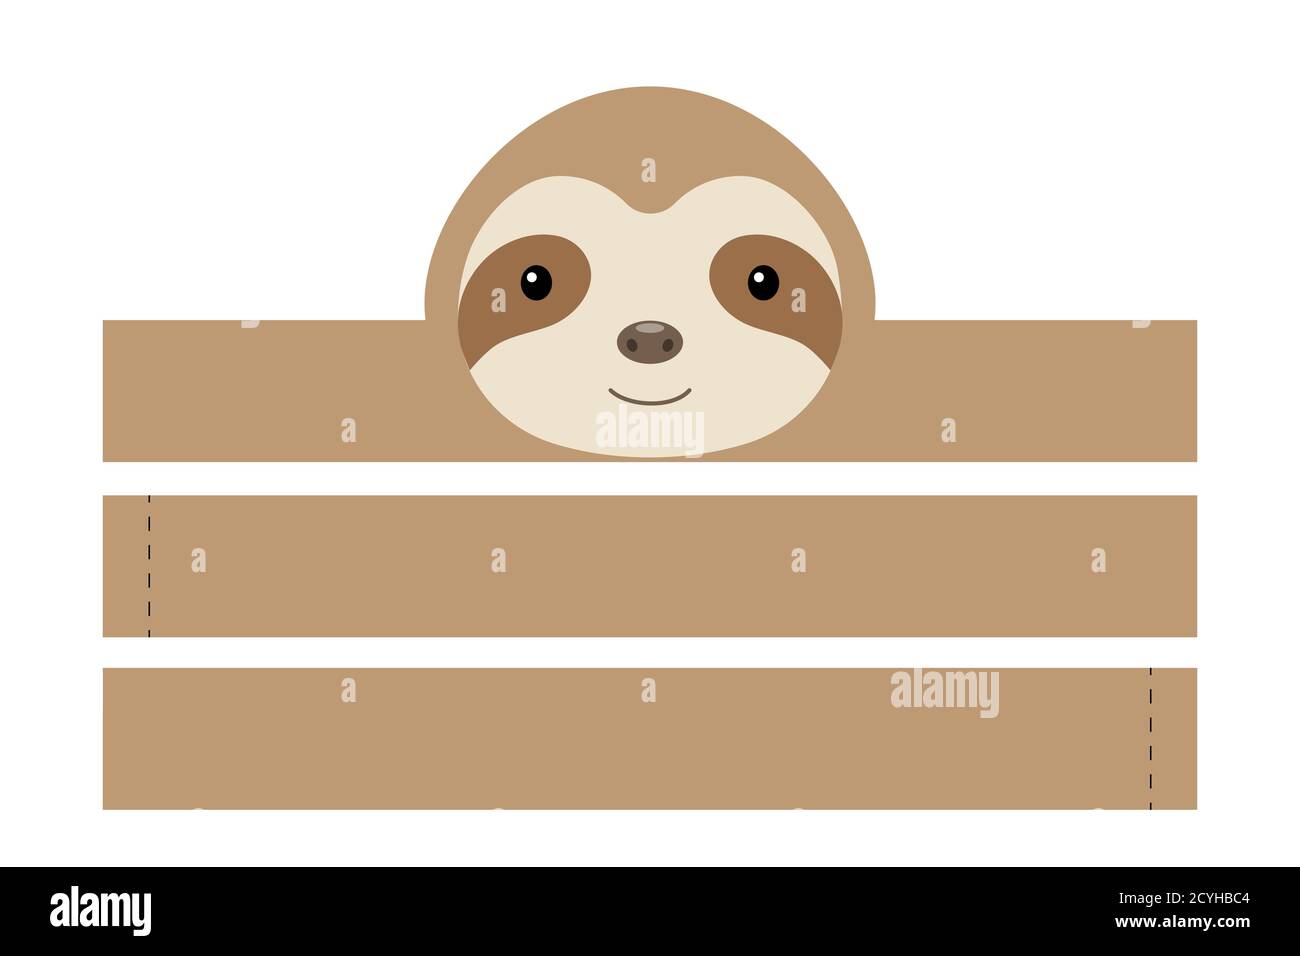 printable-sloth-paper-hat-party-crown-die-cut-template-for-birthday